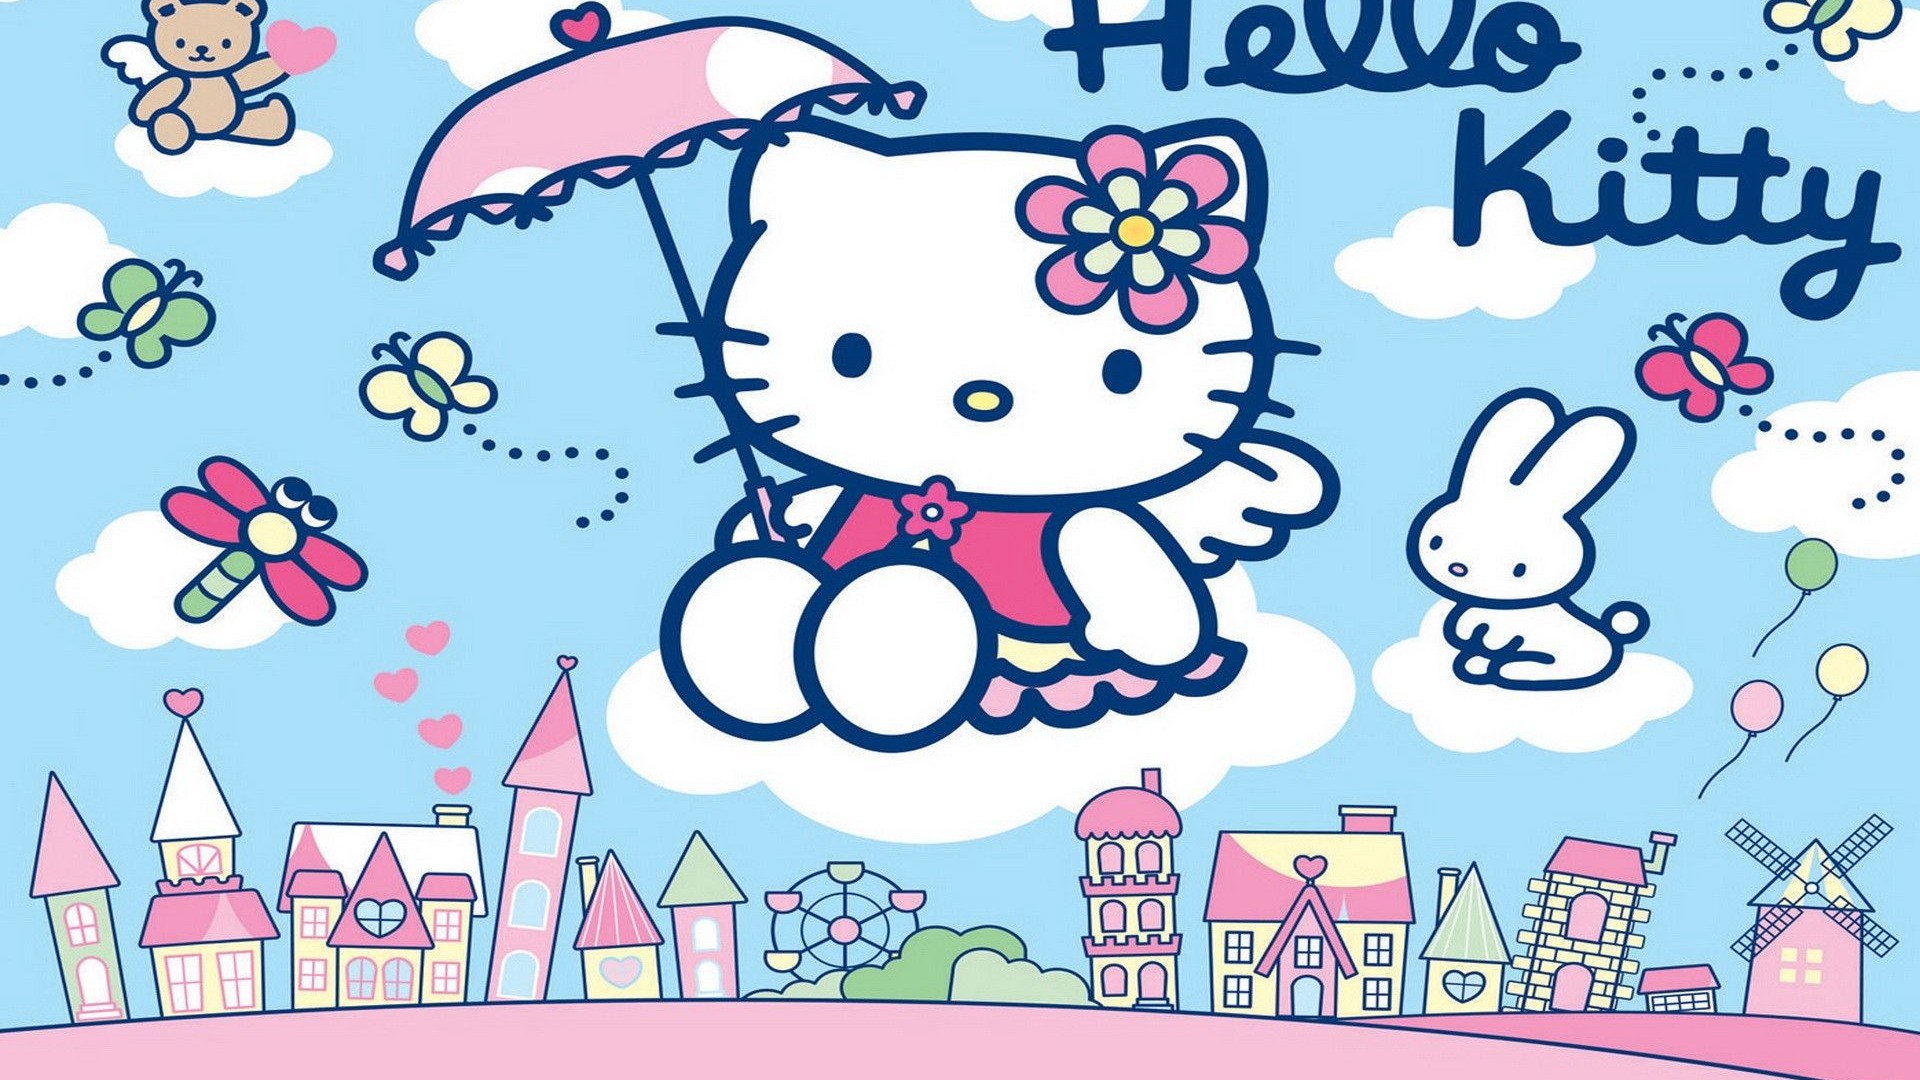 Desktop Wallpaper Sanrio Hello Kitty with image resolution 1920x1080 pixel. You can use this wallpaper as background for your desktop Computer Screensavers, Android or iPhone smartphones